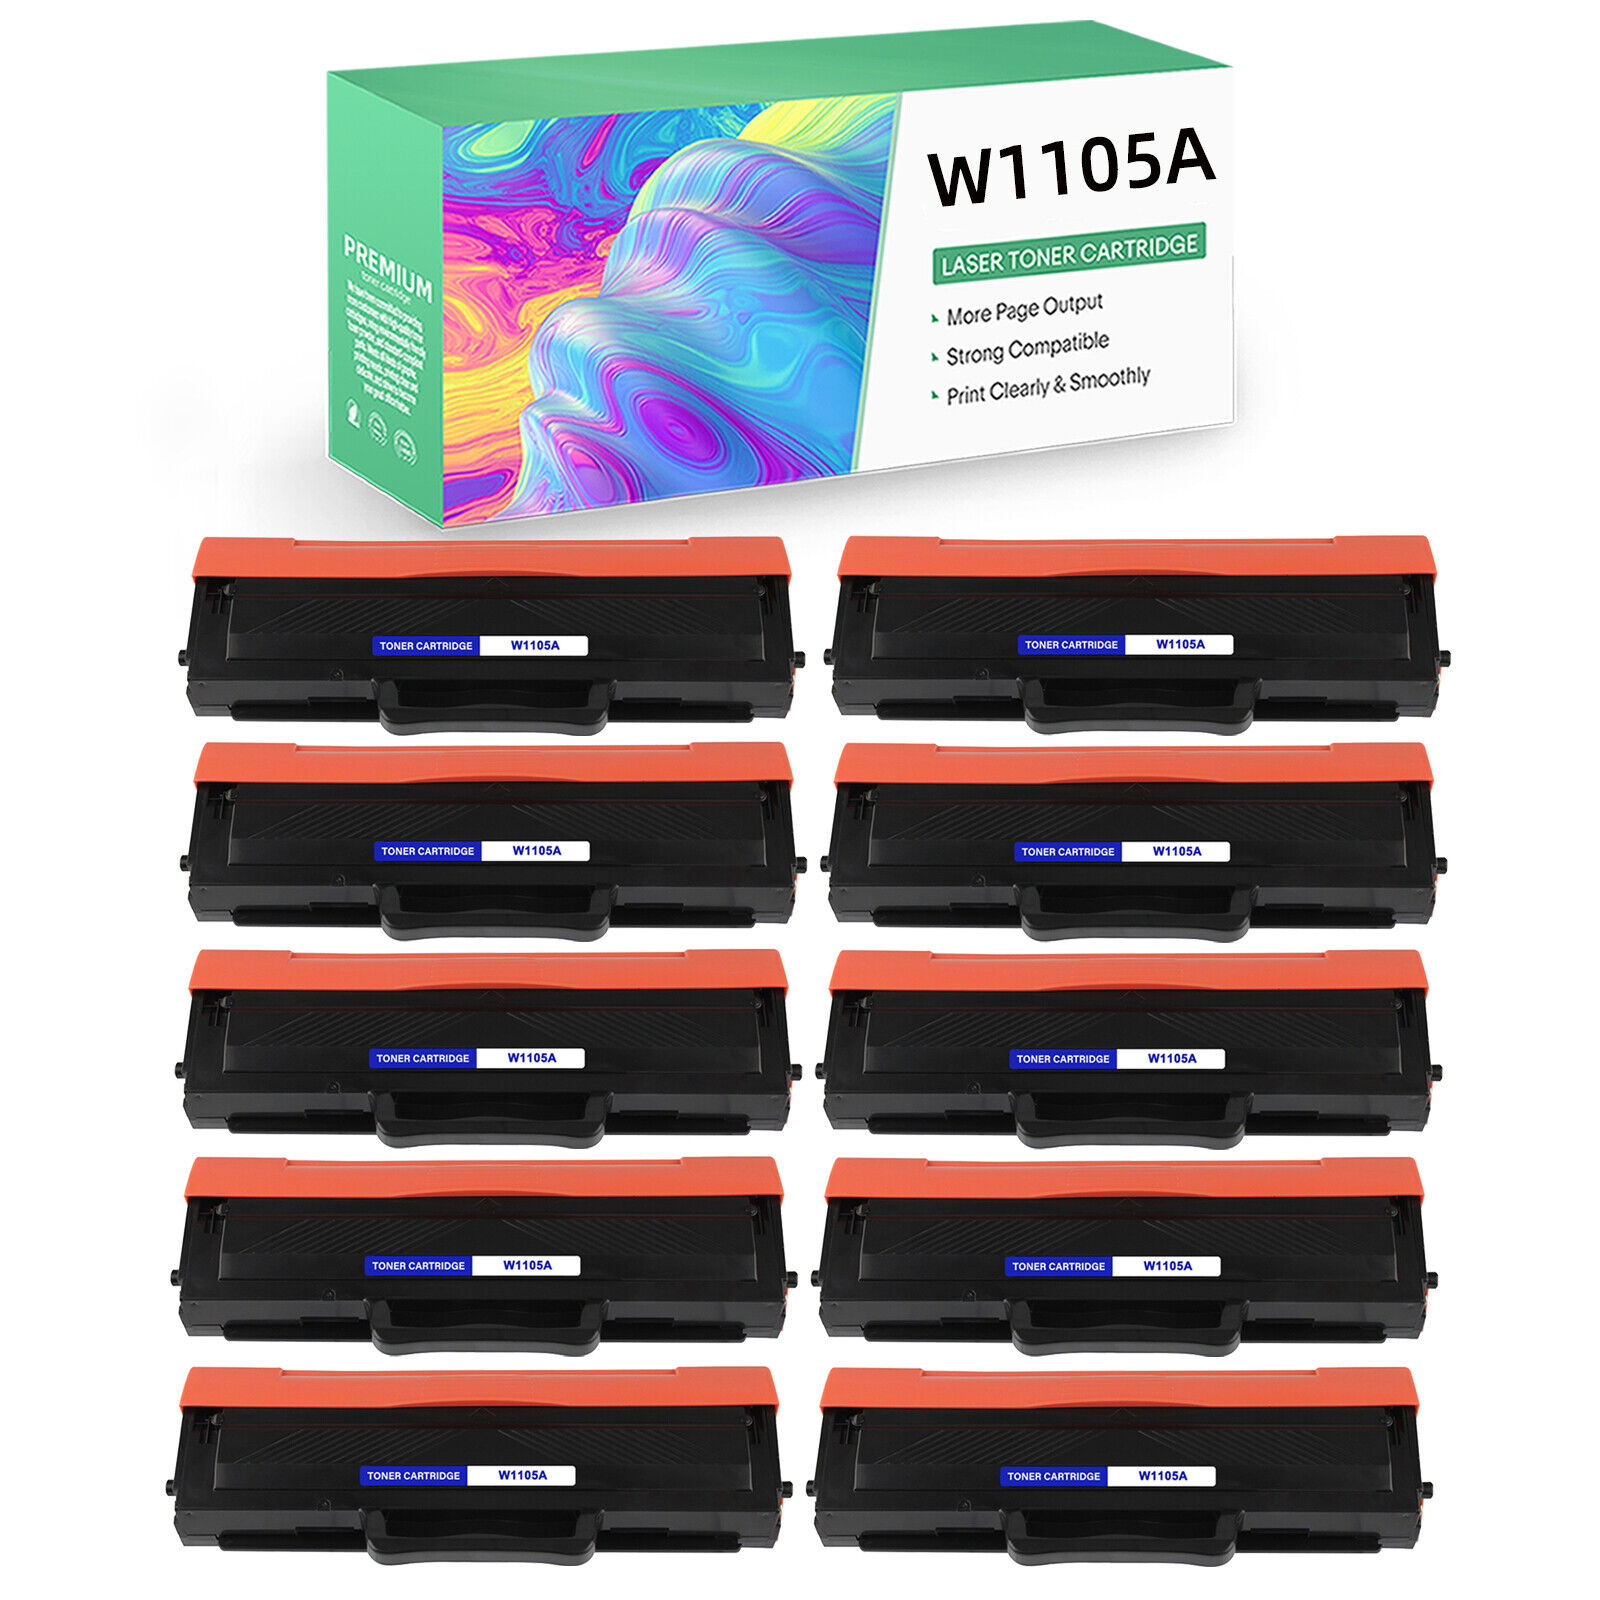 10 Pack W1105A Toner Cartridges Replacement for HP 105A 1105A Used for MFP135a